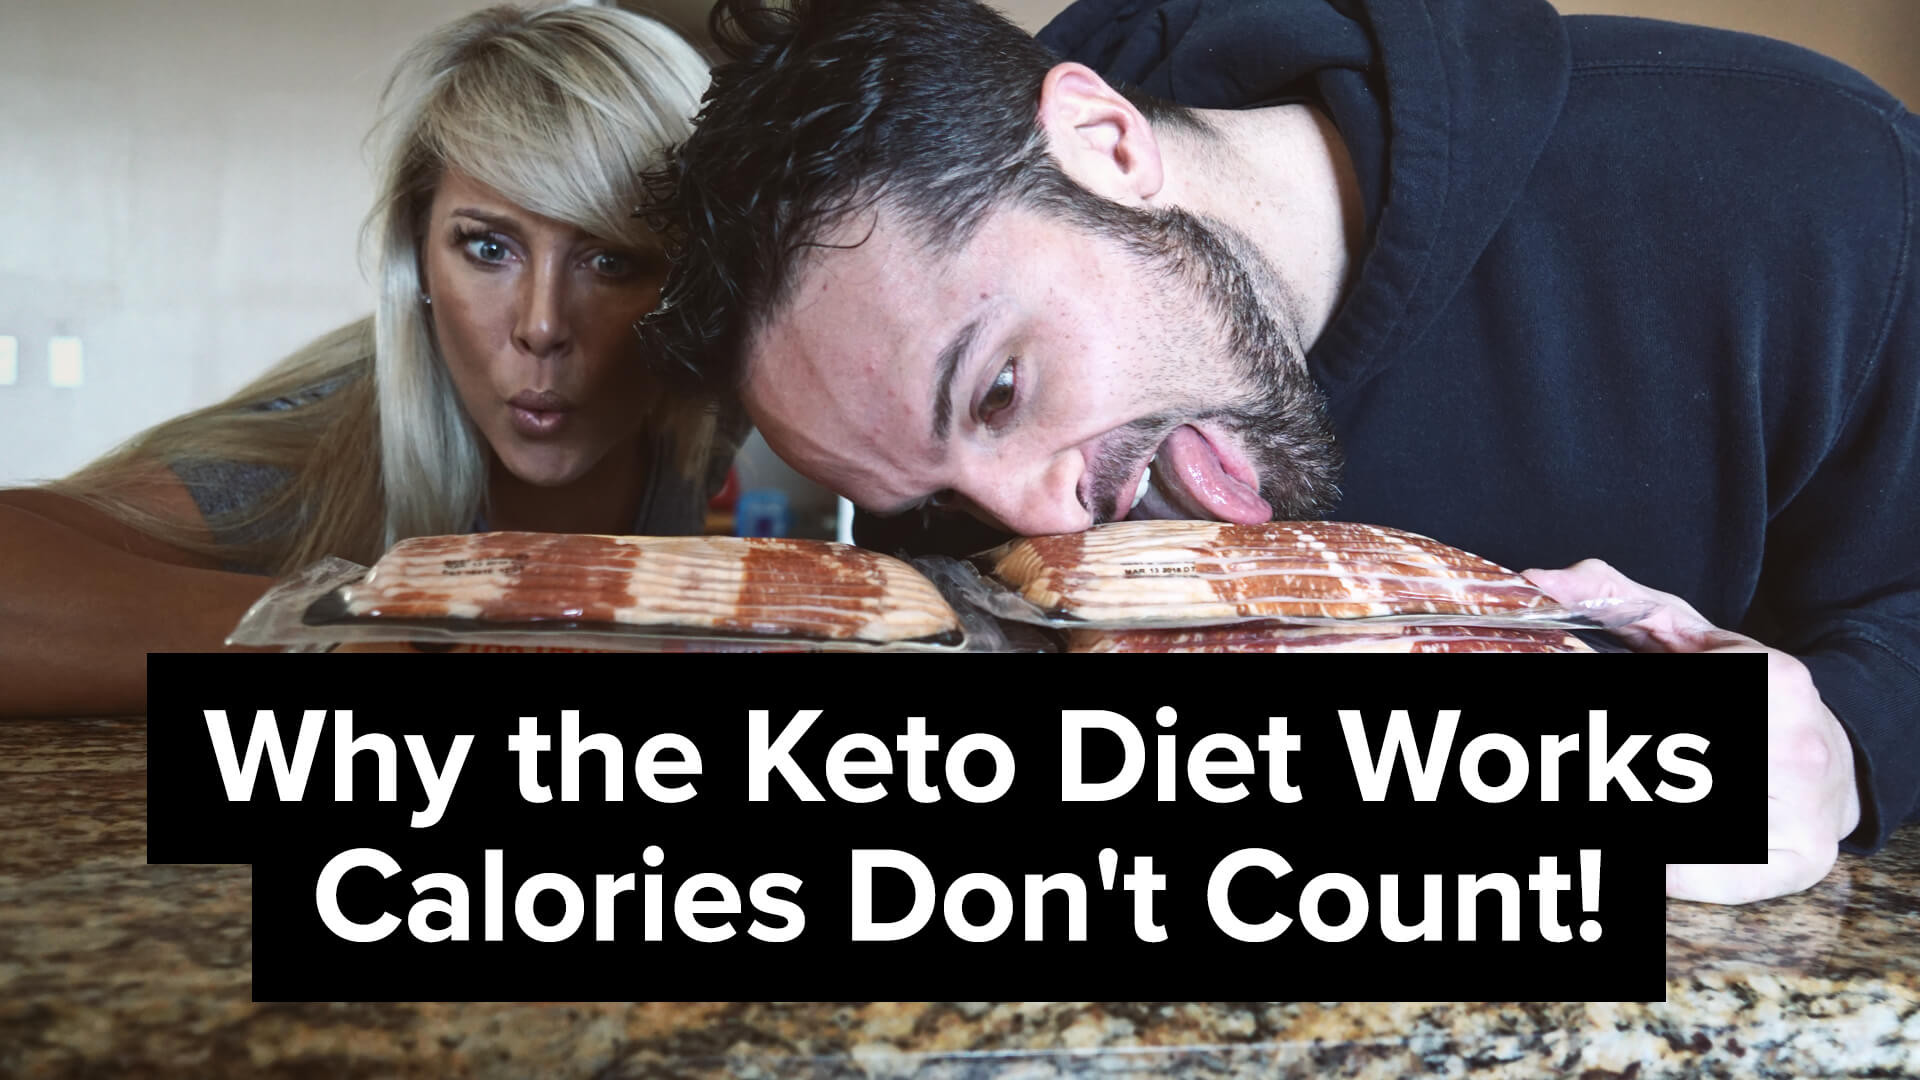 Why Does The Keto Diet Work
 Why the Keto Diet Works Calories Don t Count